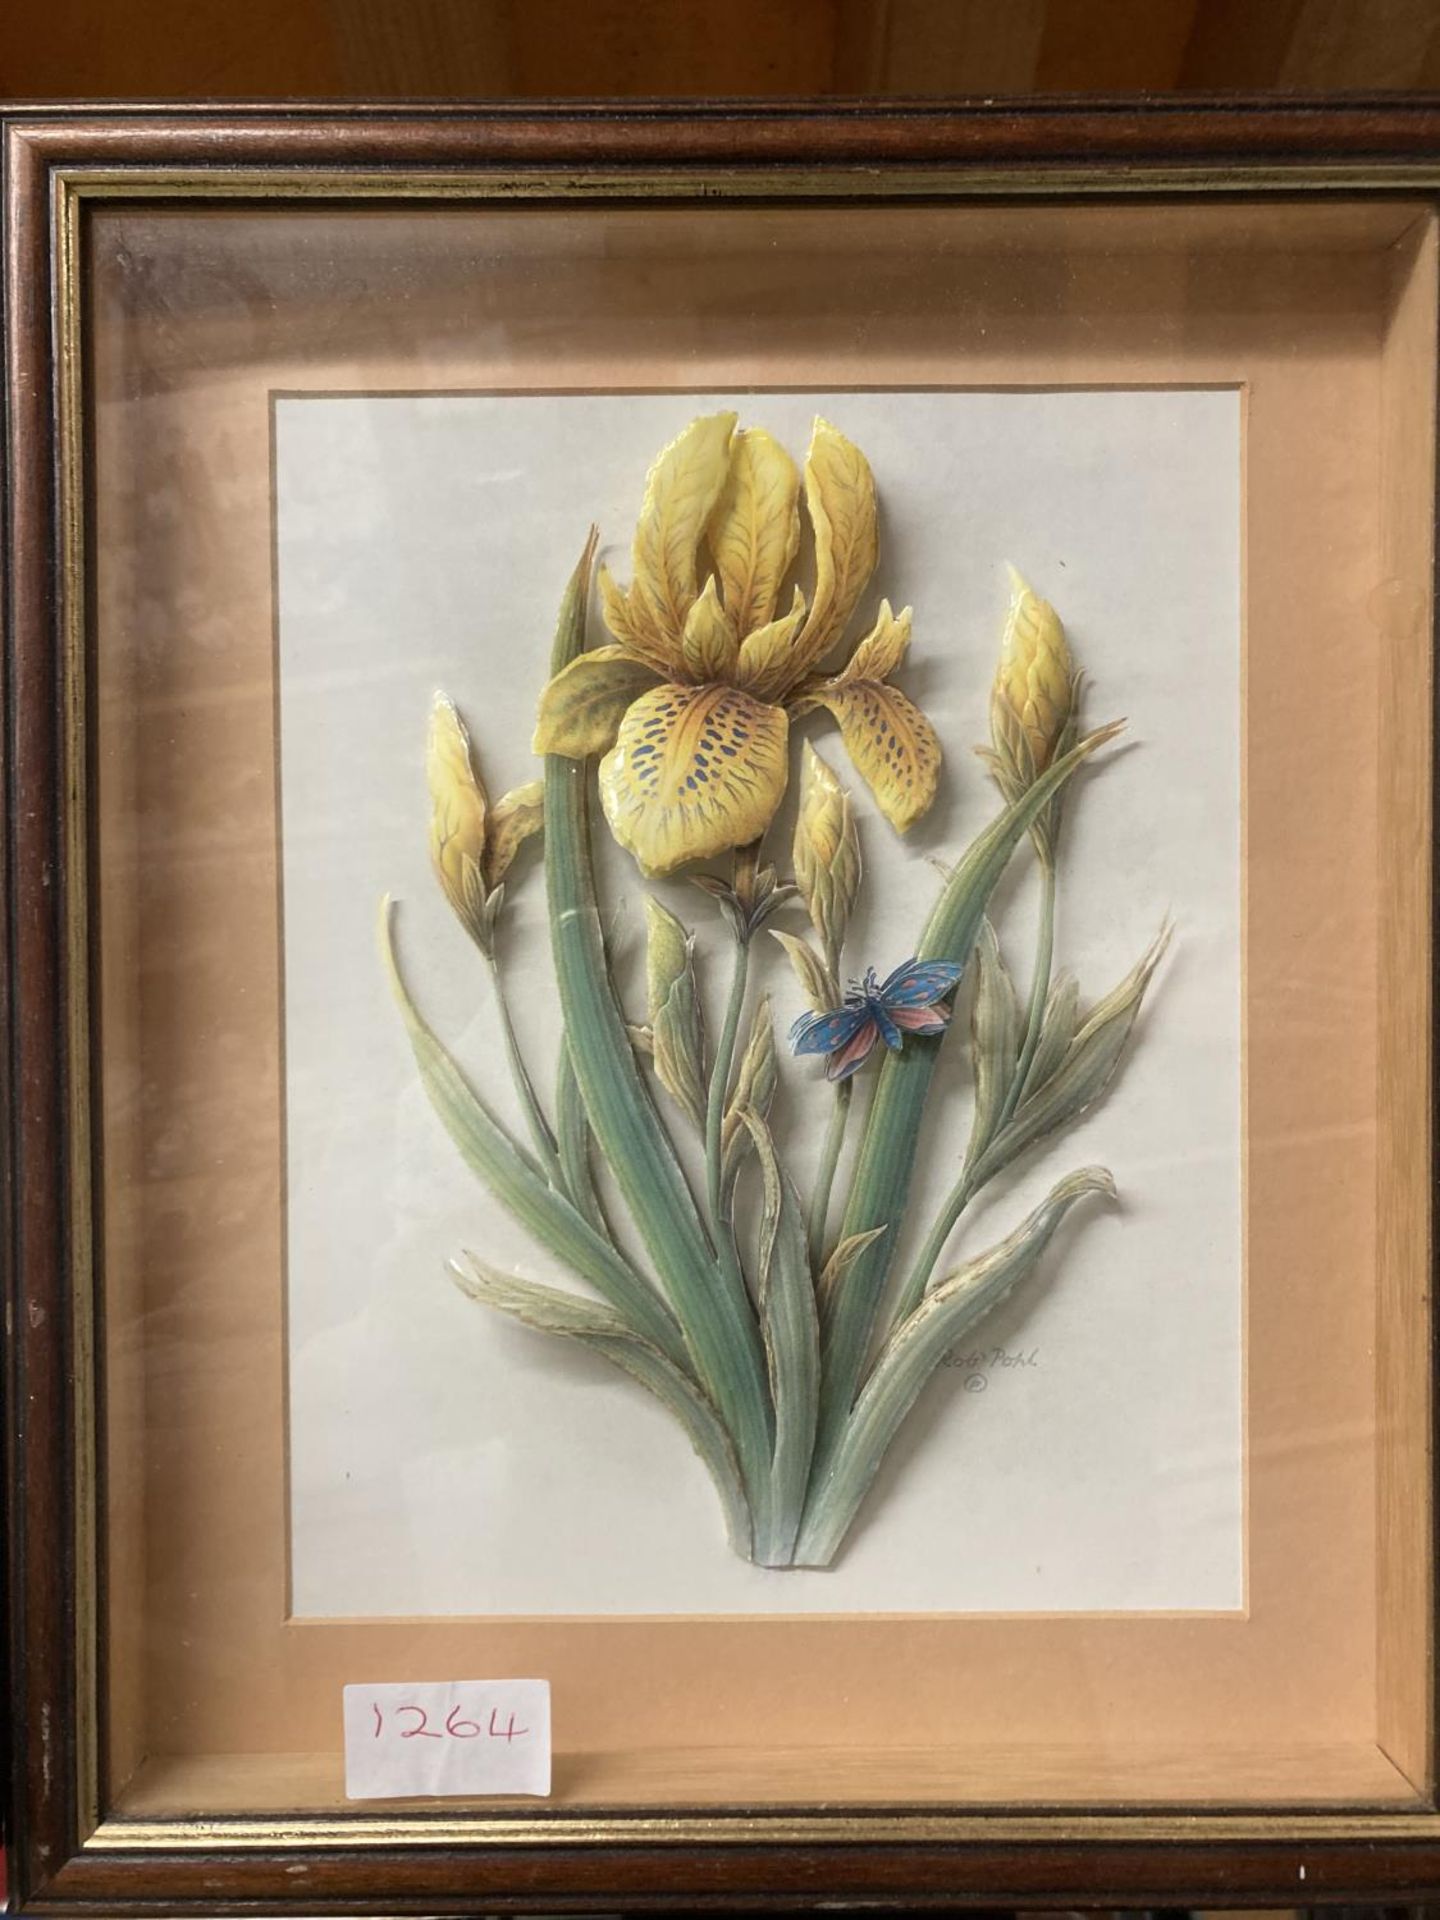 A FRAMED CERAMIC STUDY OF IRIS WITH A BUTTERFLY